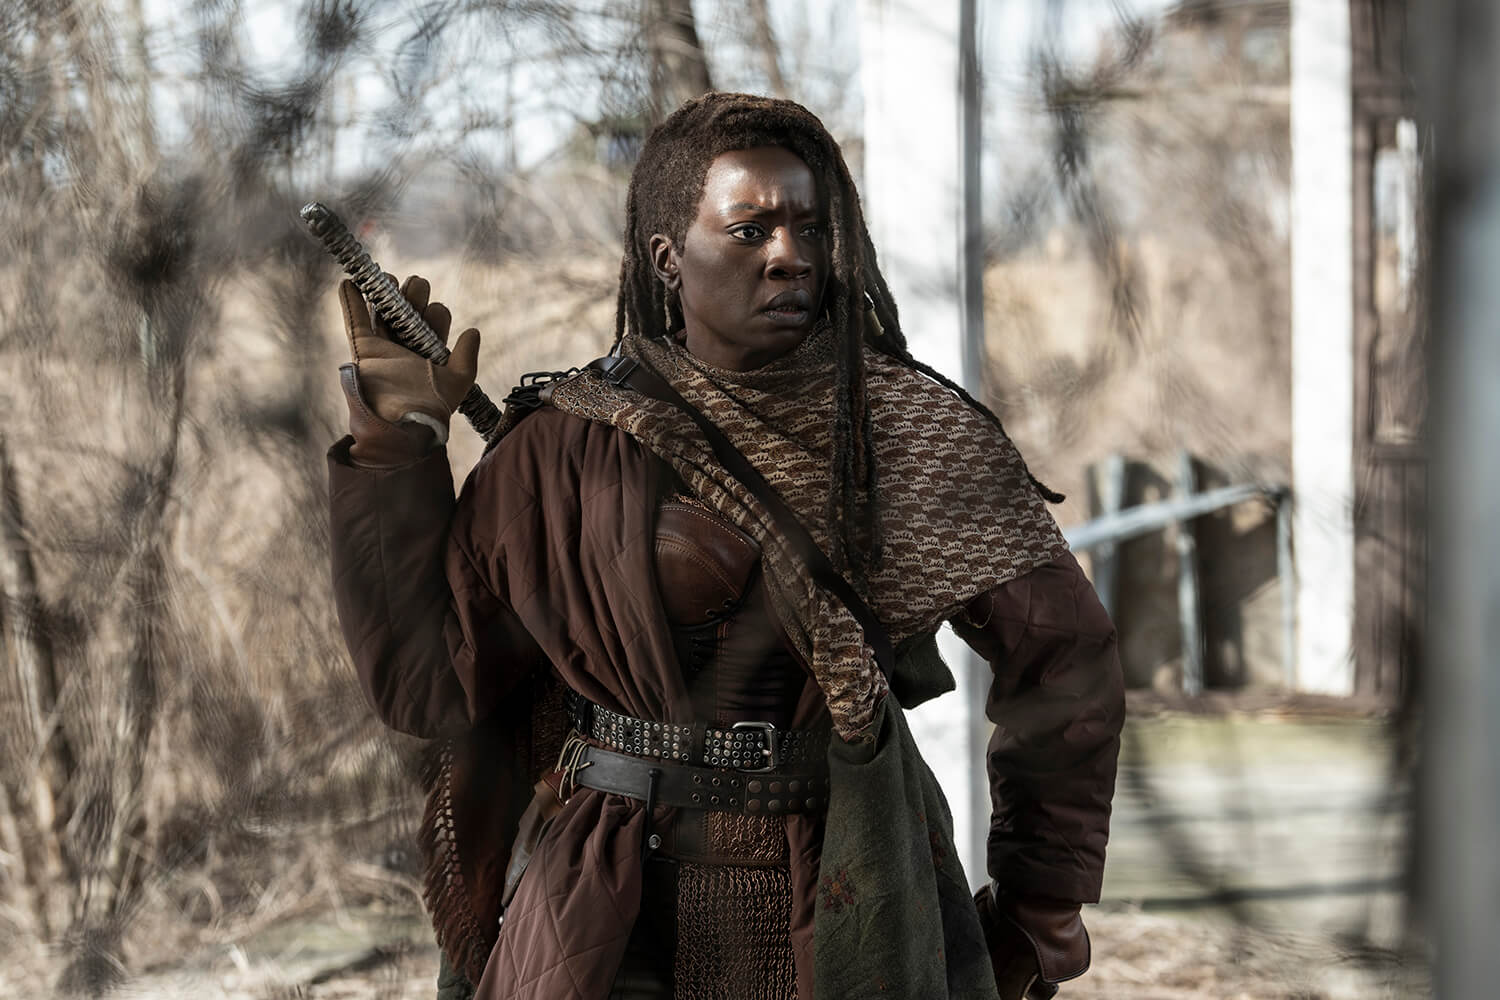 Michonne in the forest, hand on her katana in a scene from The Walking Dead: The Ones Who Live.